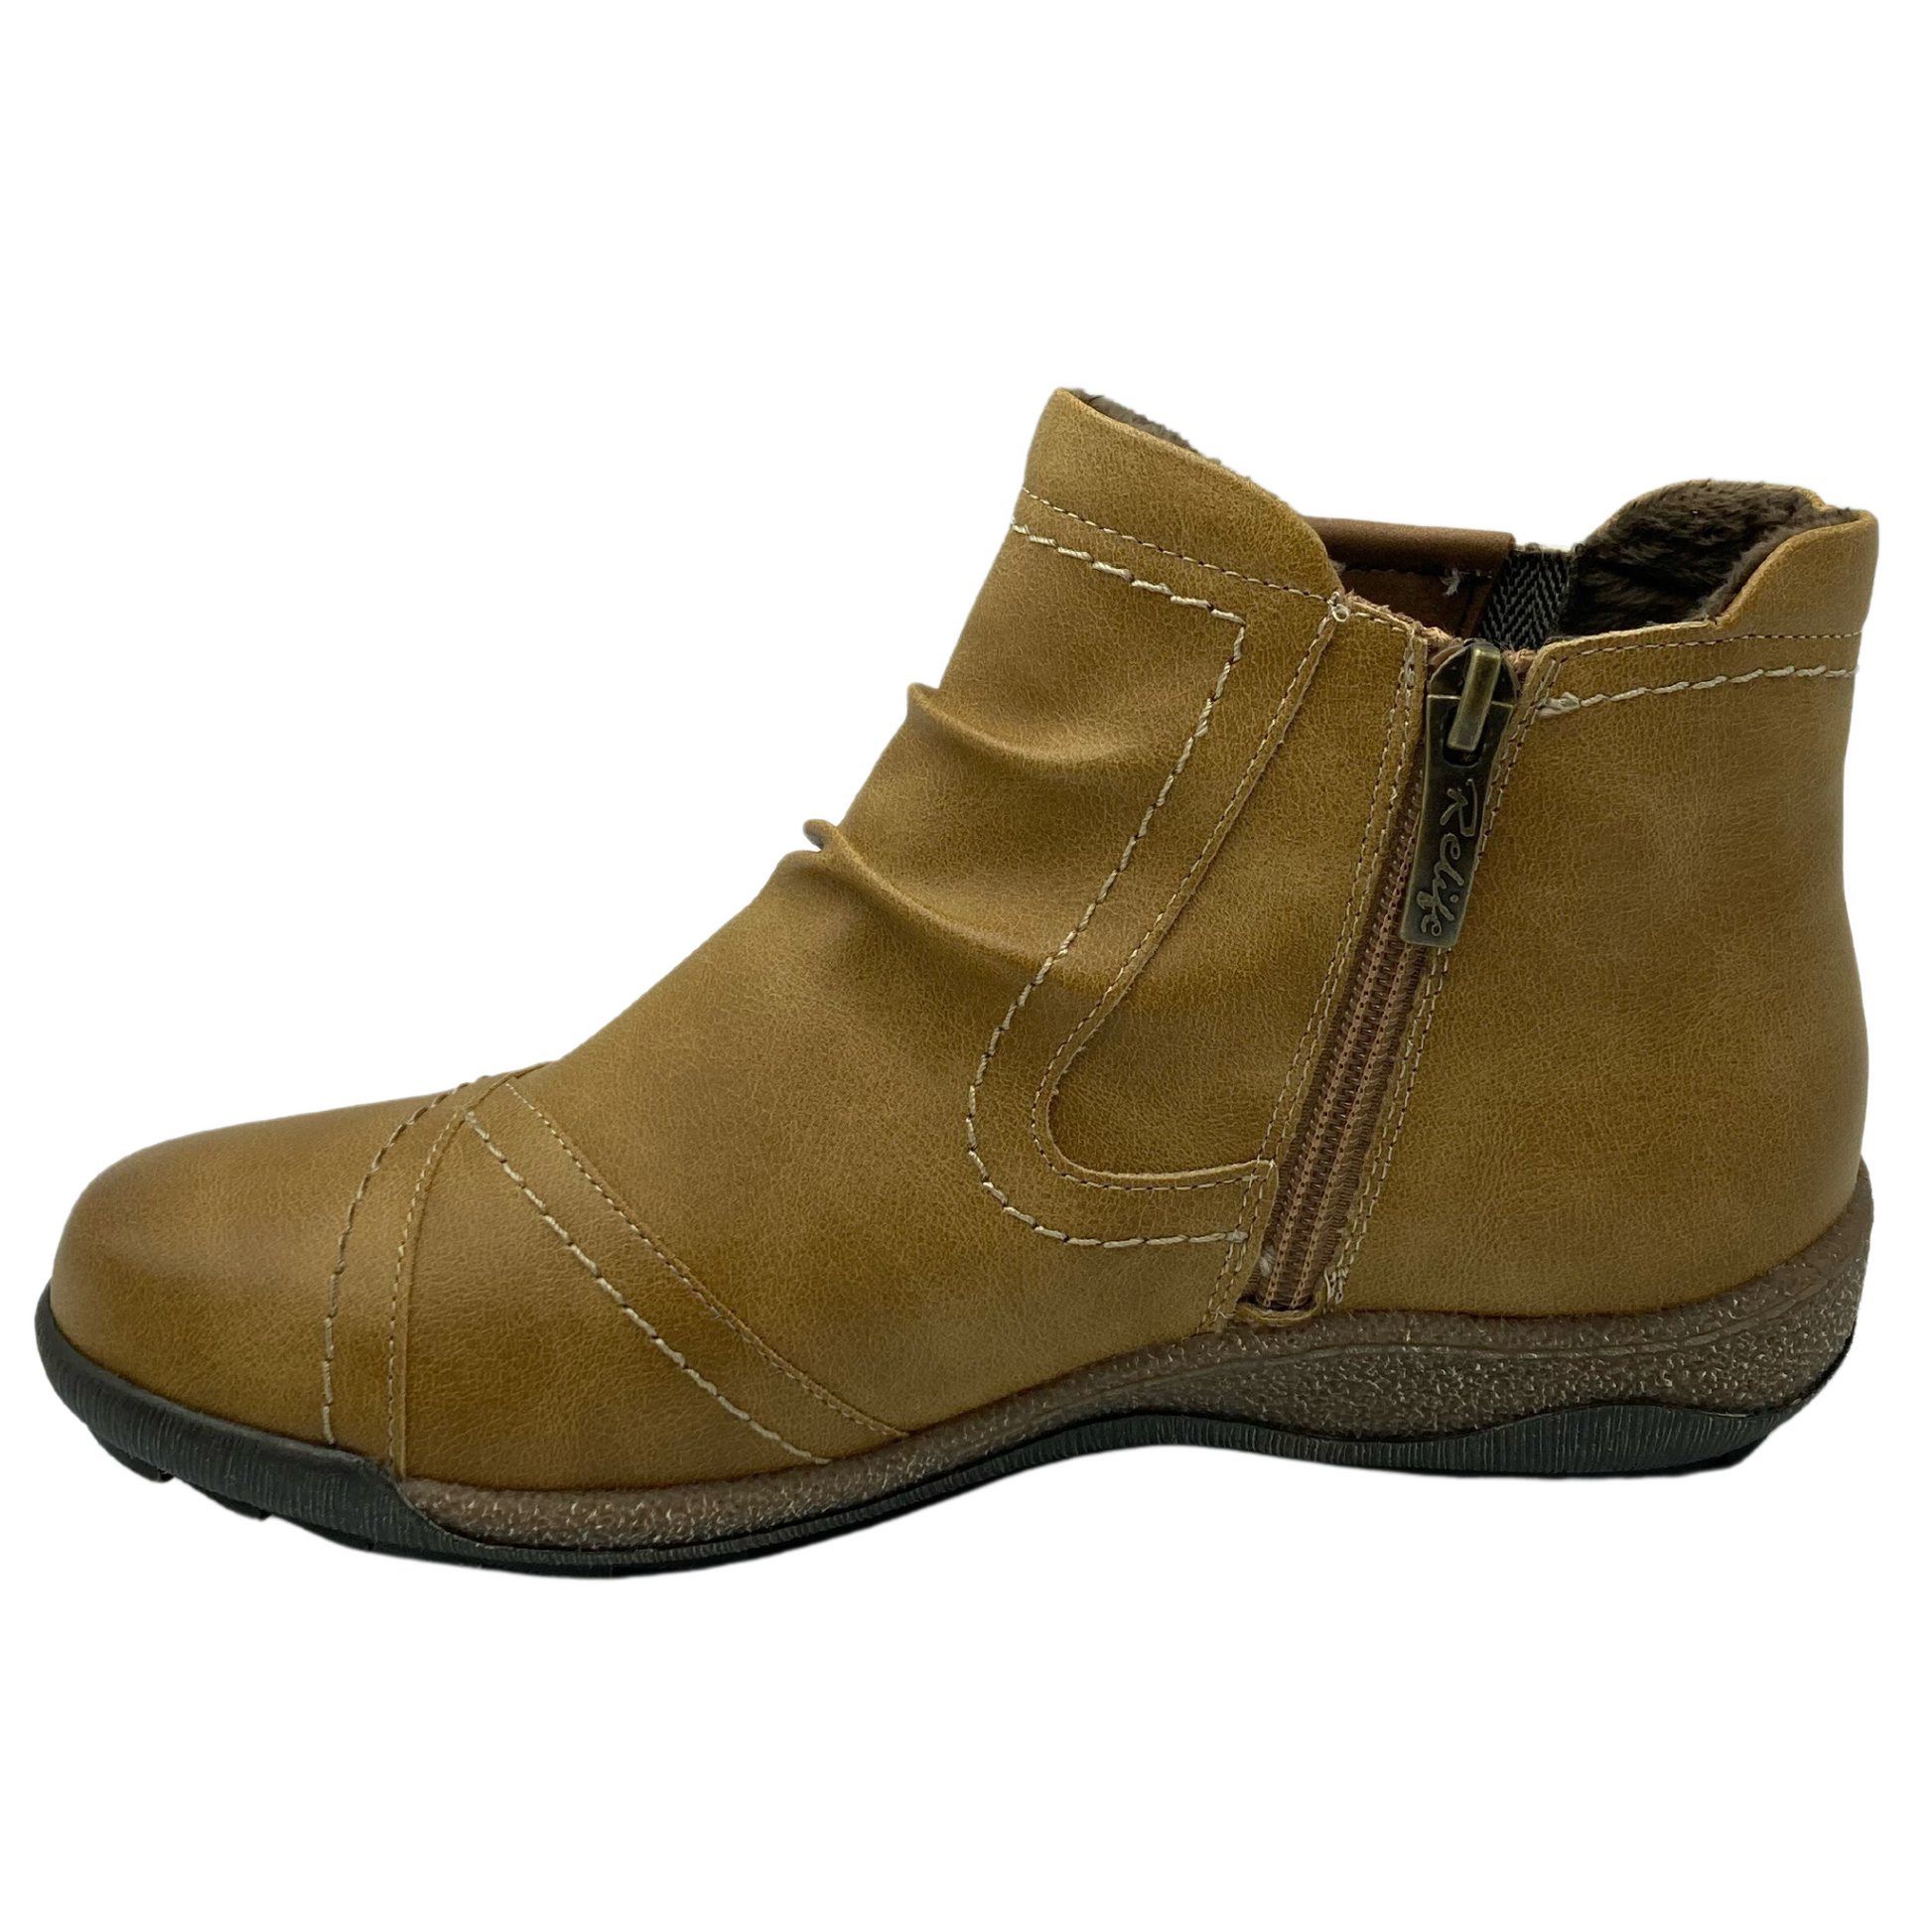 Left facing view of mustard short boot with inner side zipper and rubber outsole